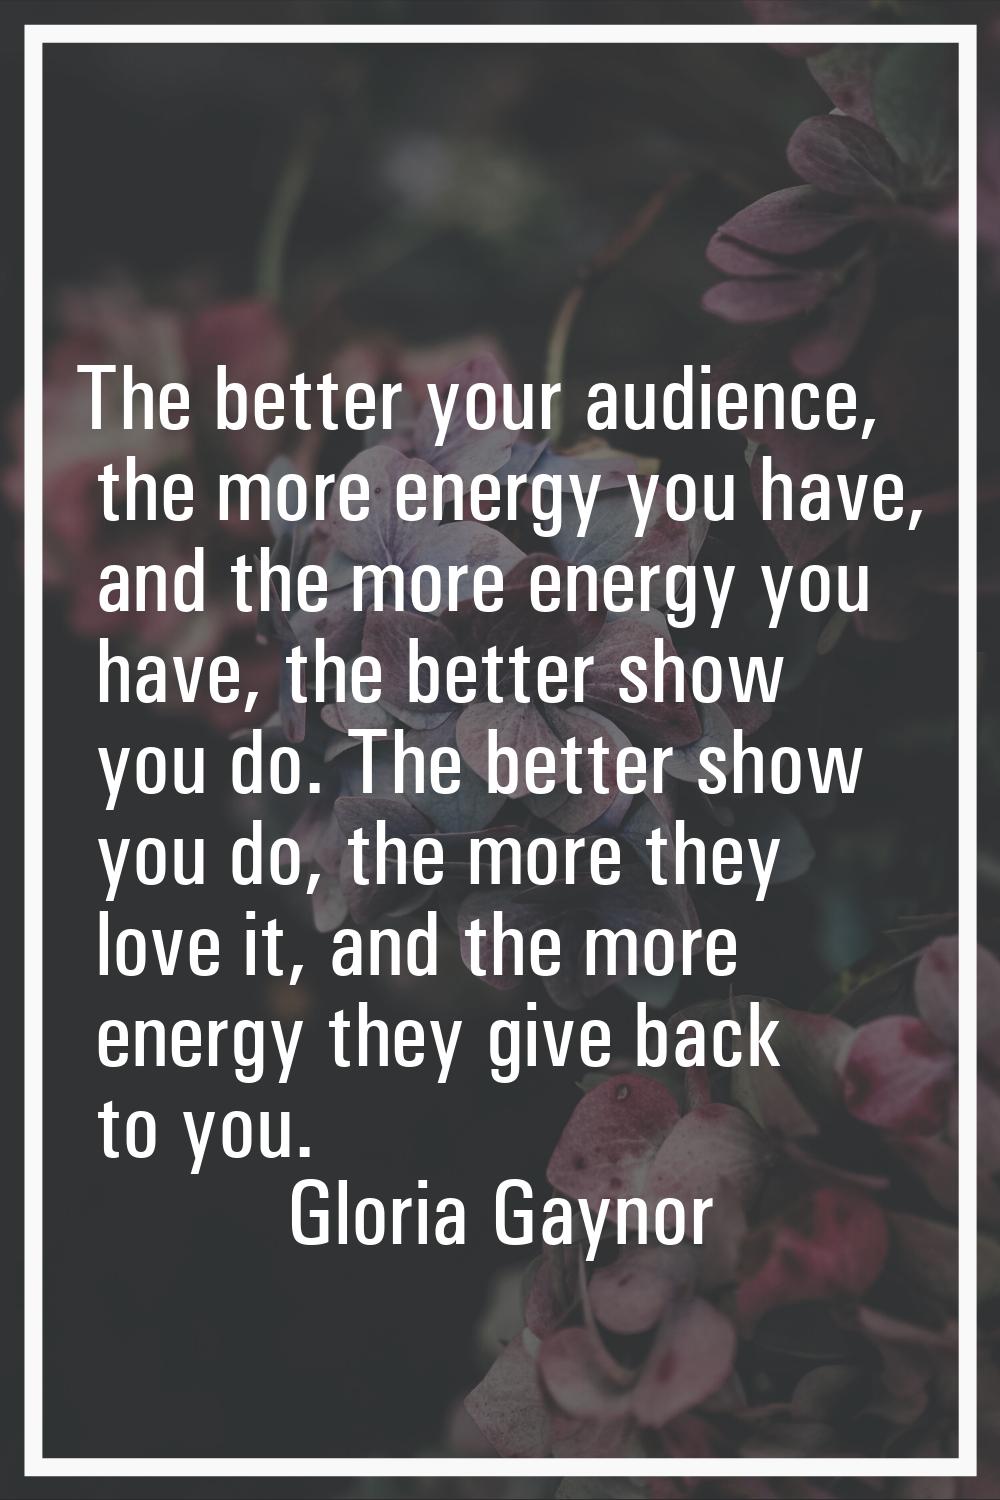 The better your audience, the more energy you have, and the more energy you have, the better show y